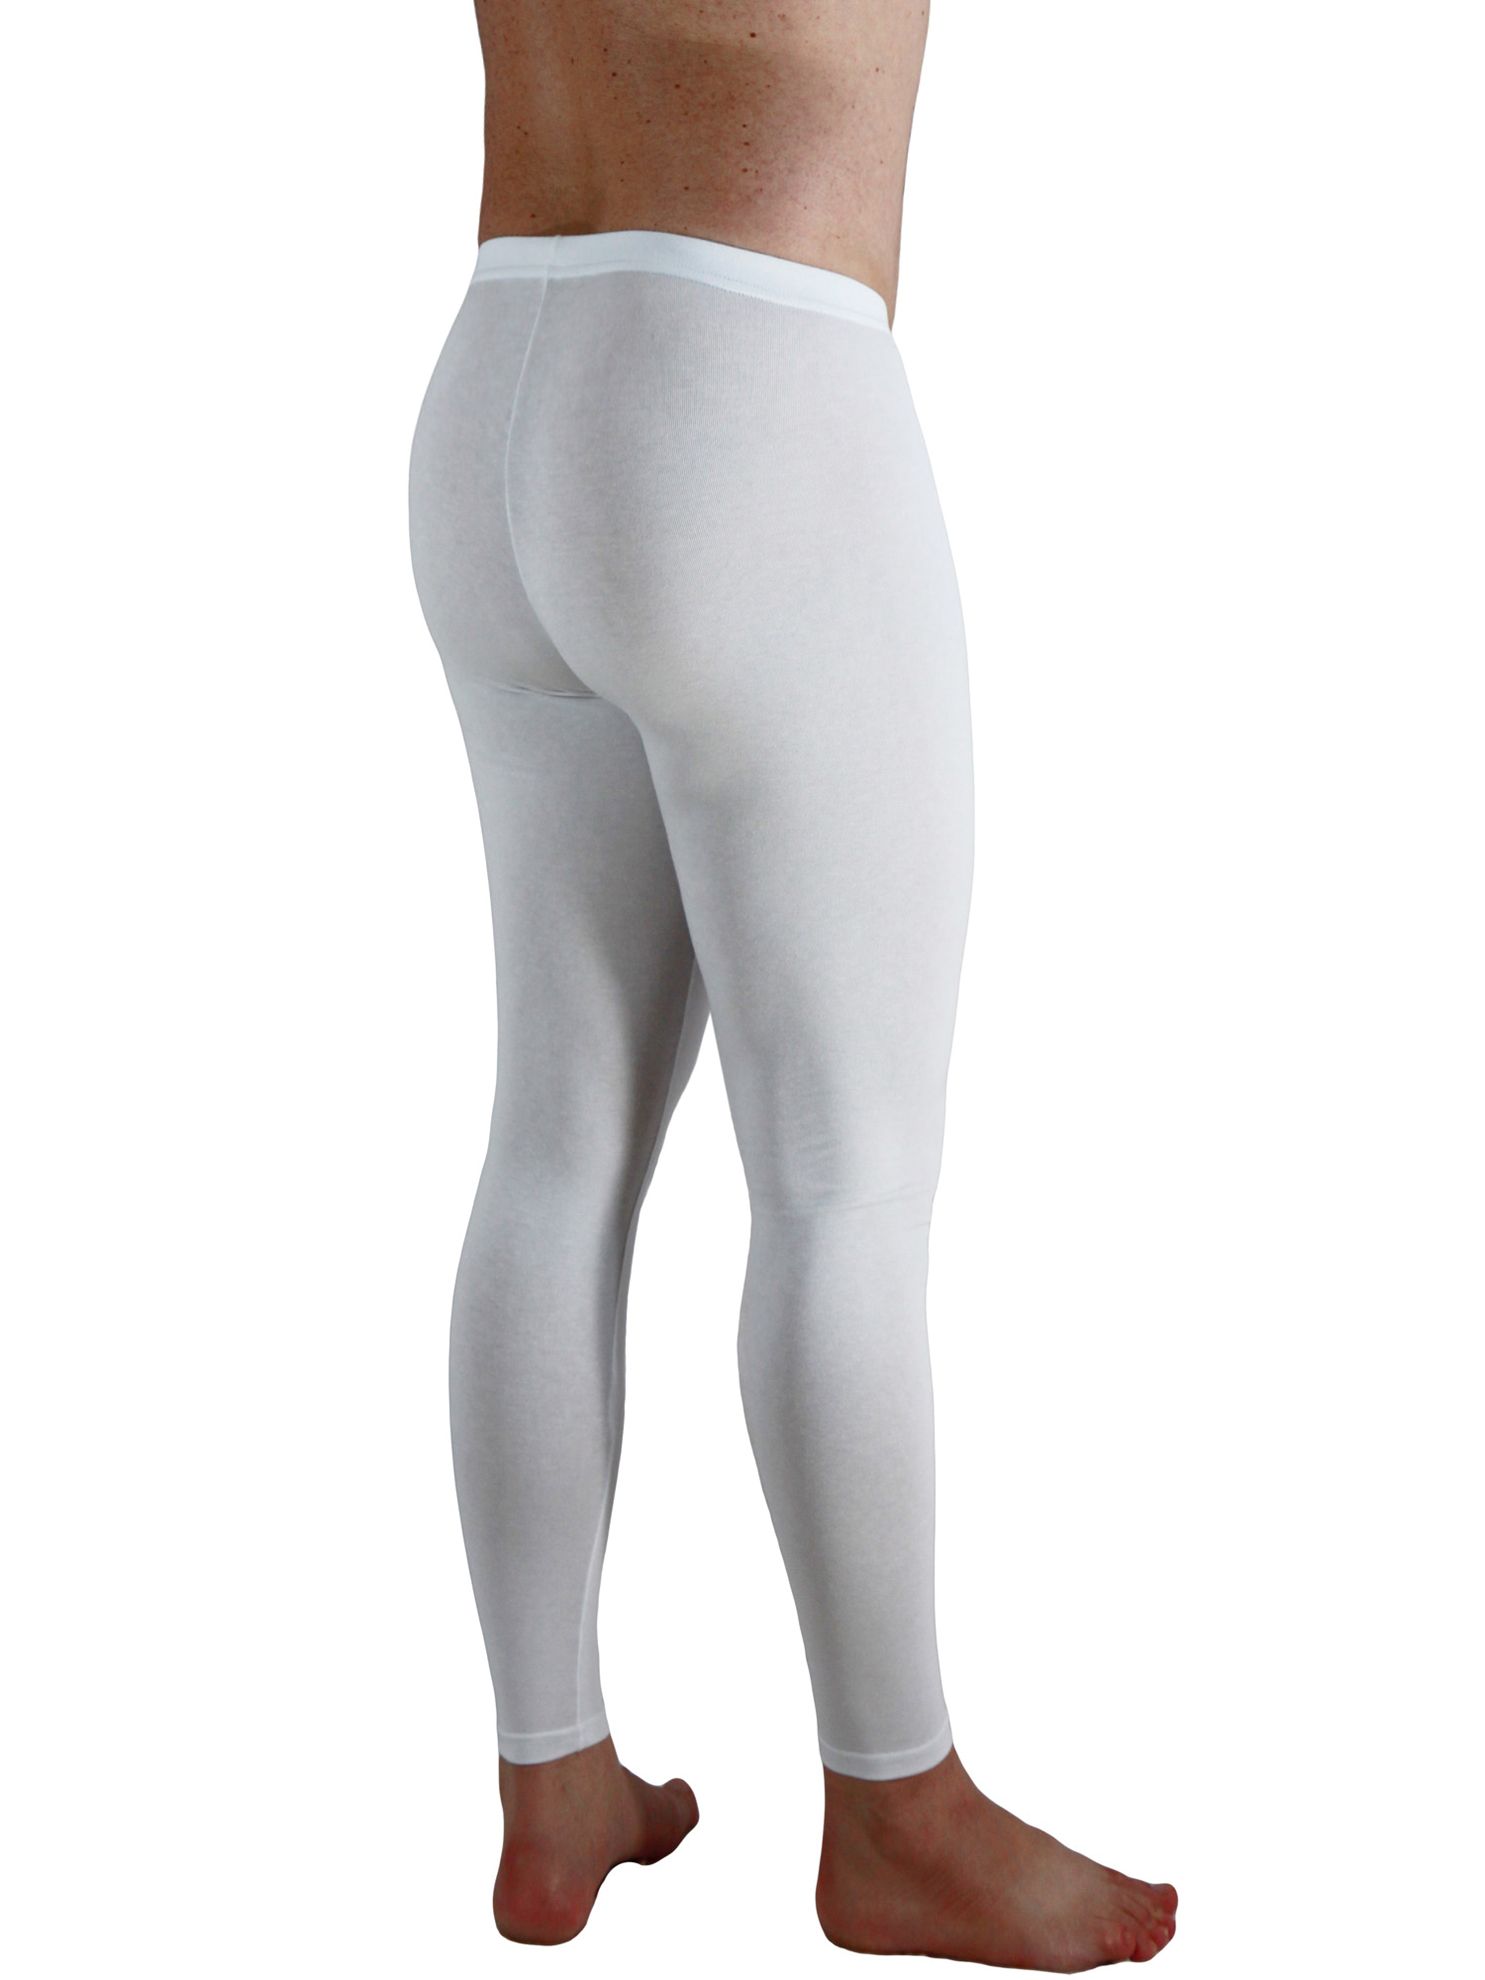 BT 308F COTTON LYCRA FOOTED TIGHTS